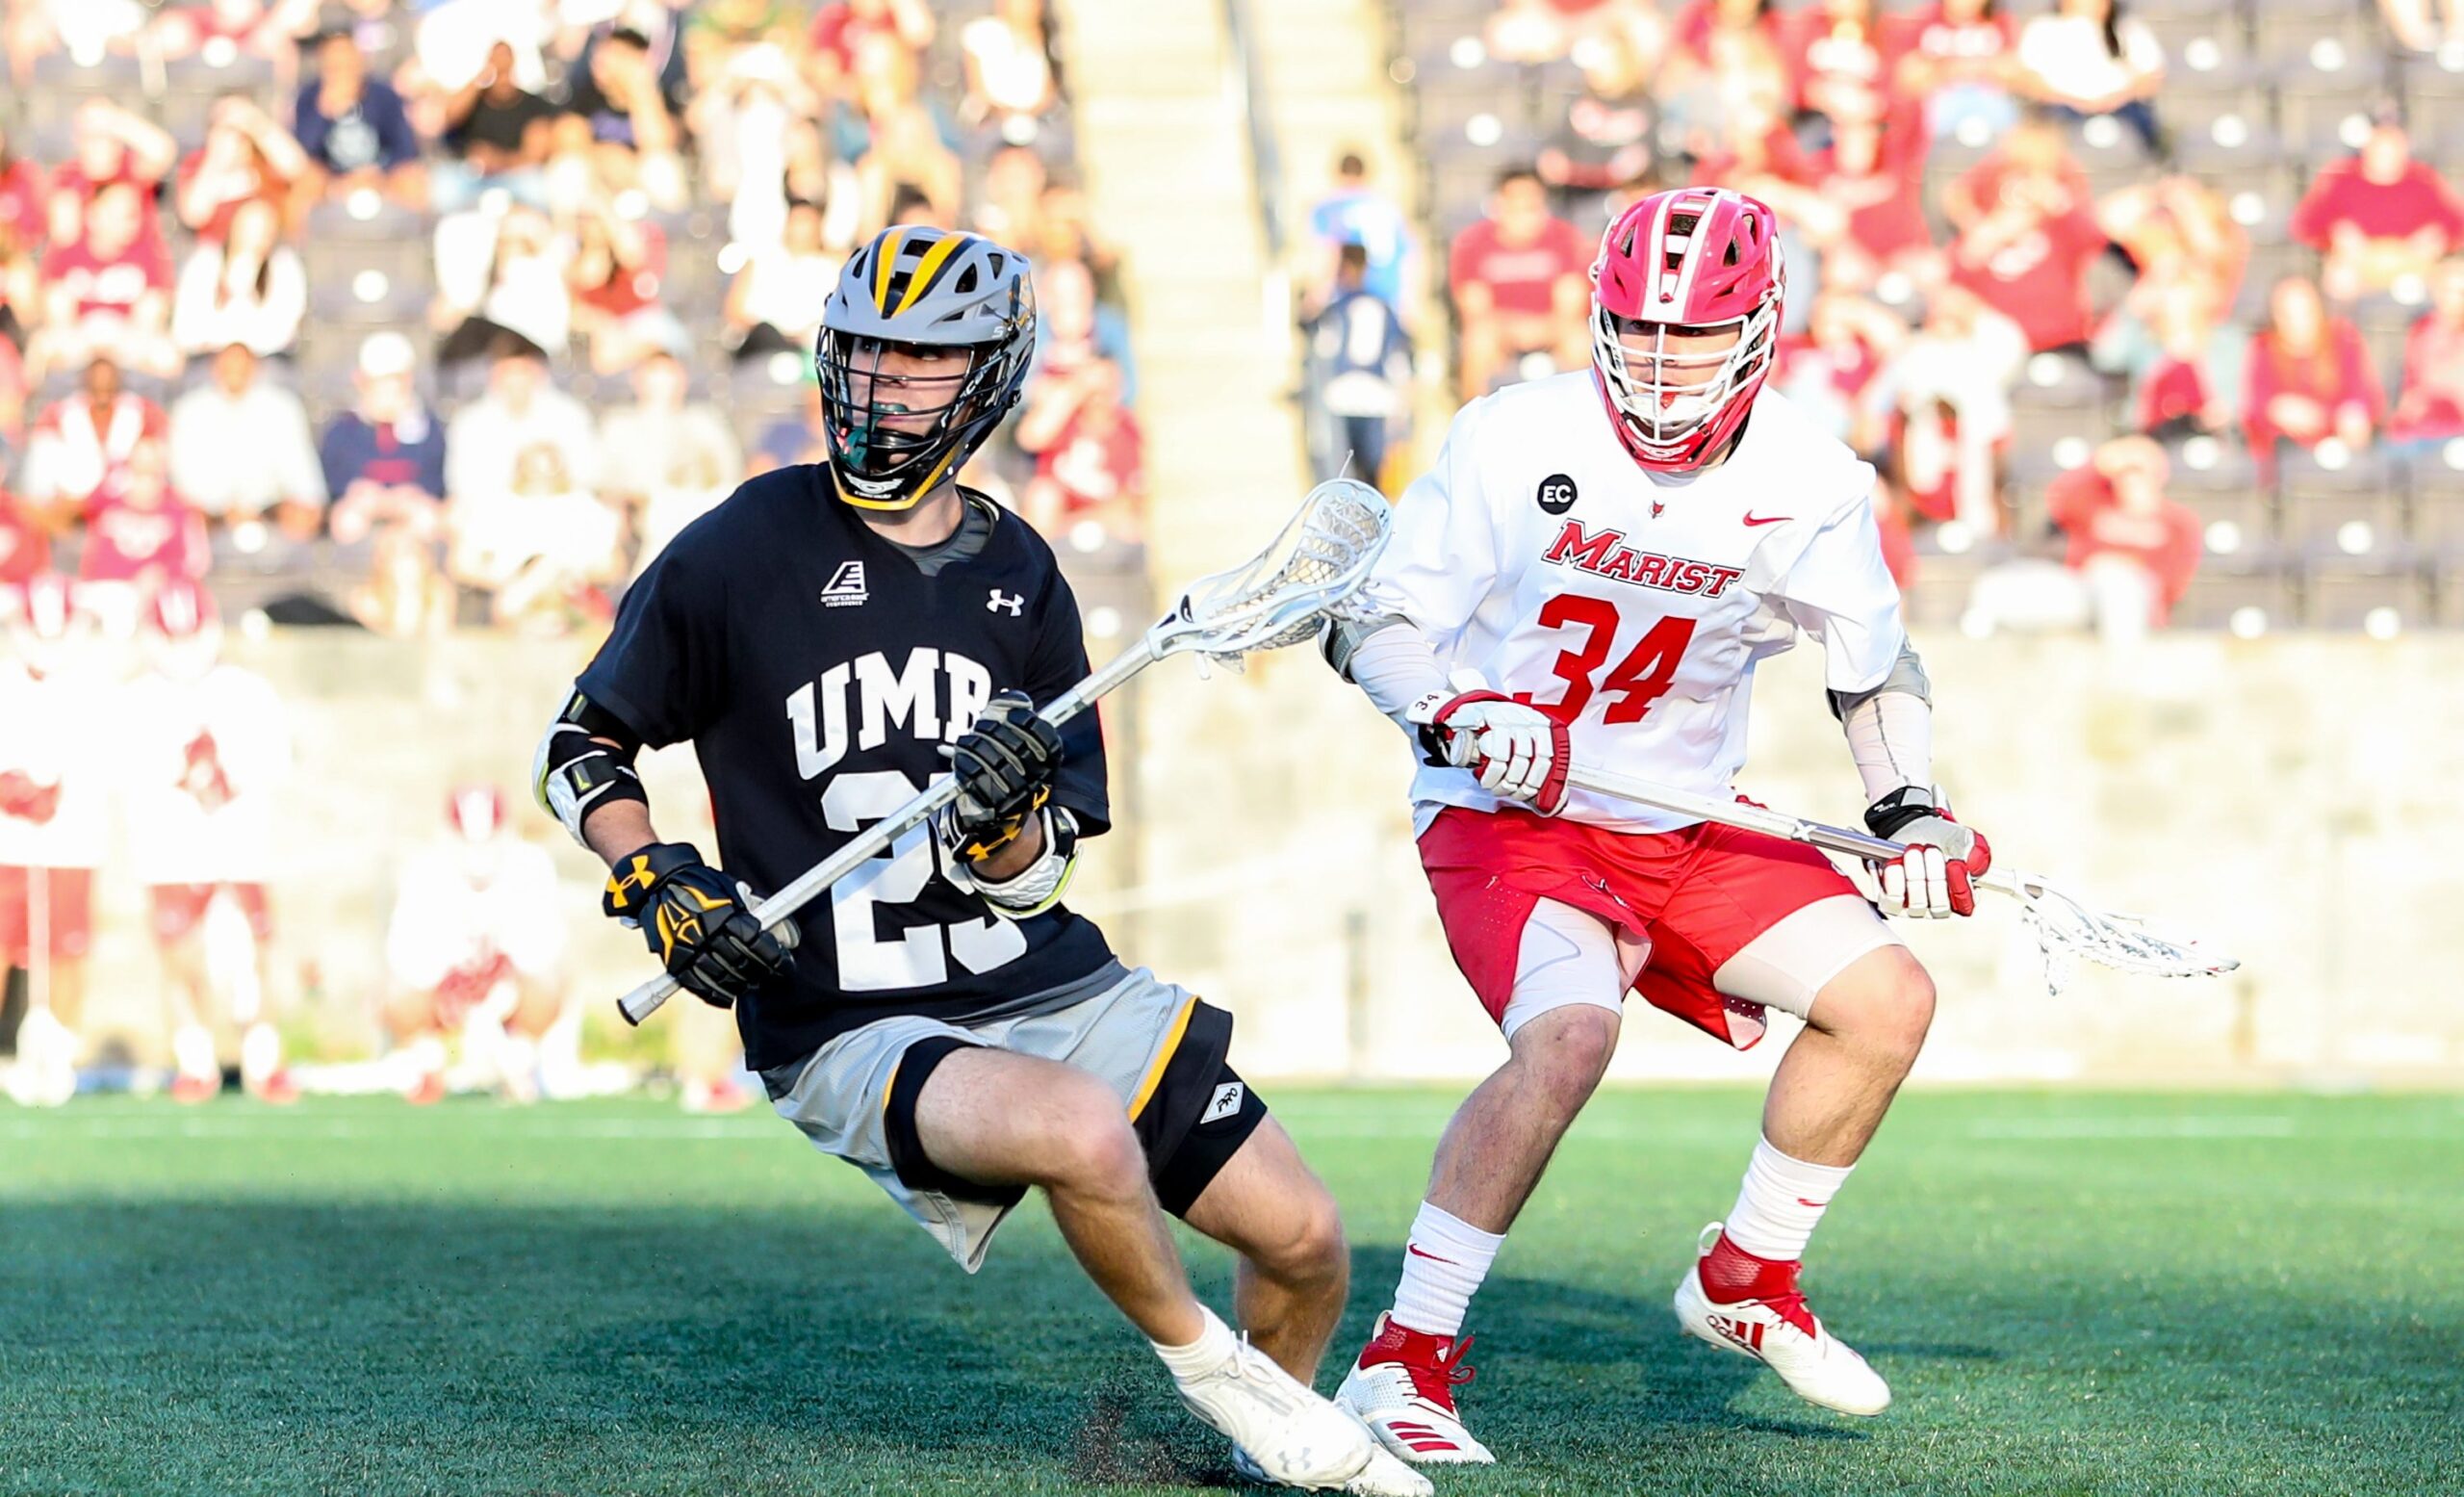 UMBC to face No. 1 seed Penn State in NCAA men’s lacrosse tournament